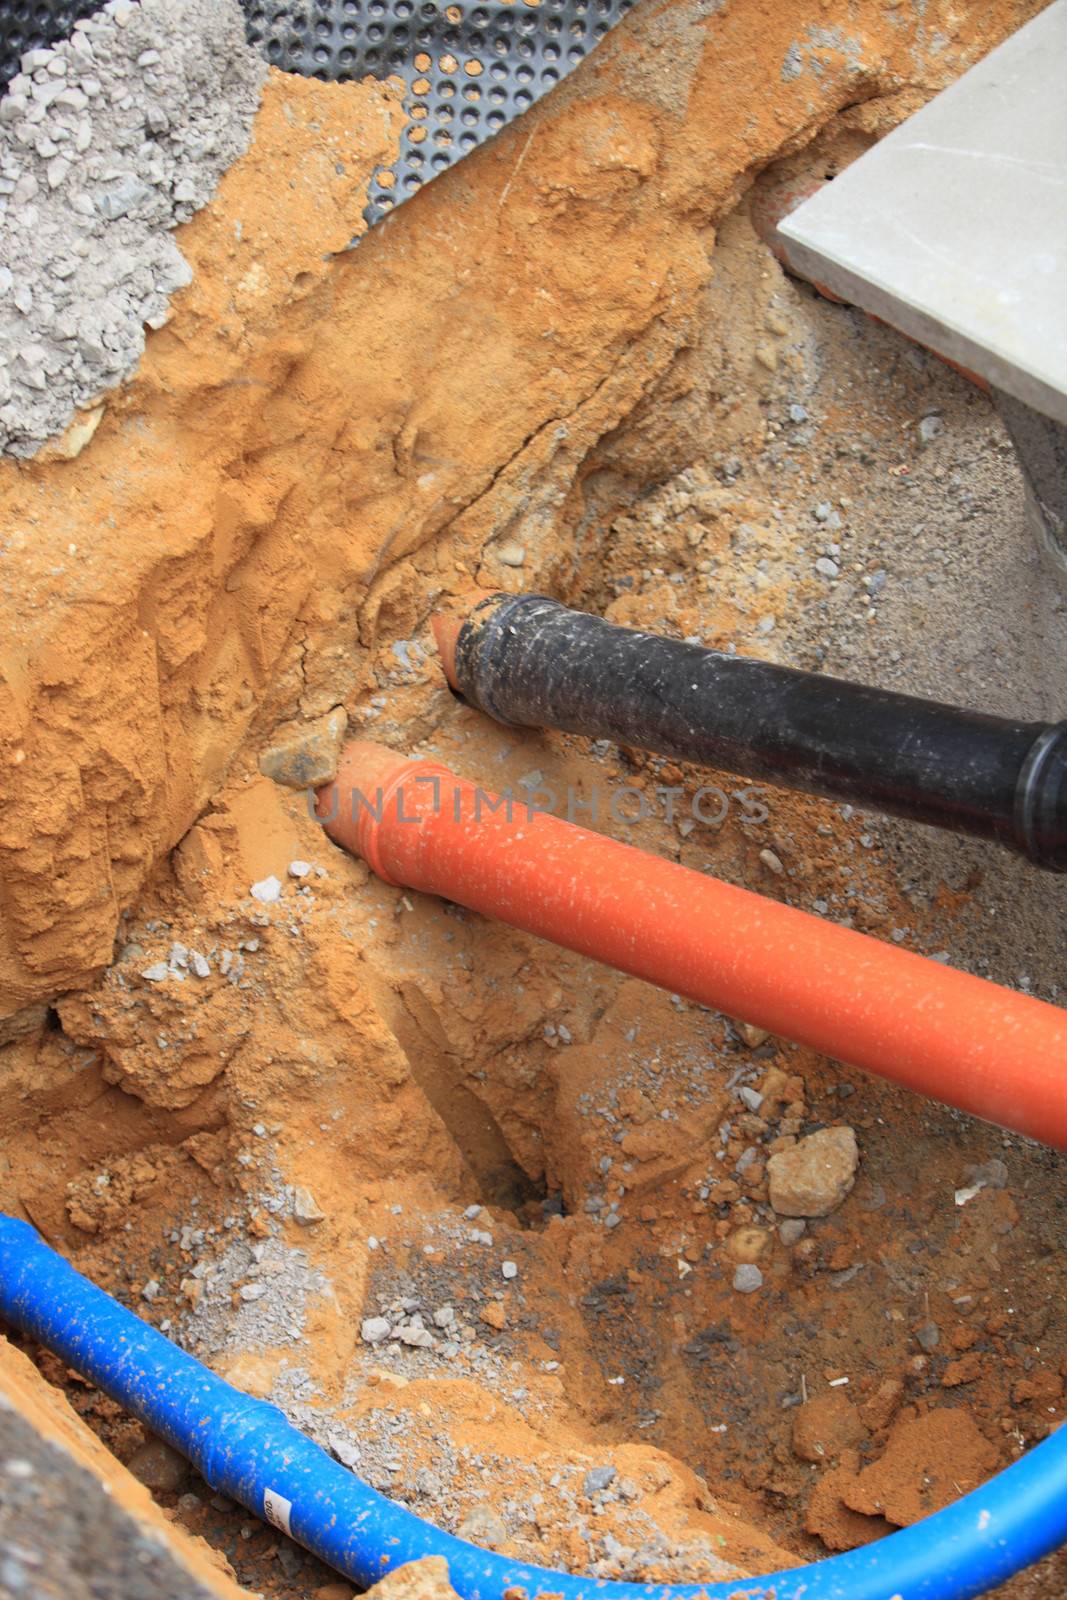 Incoming utilities to a domestic house passing underground through plastic conduit piping